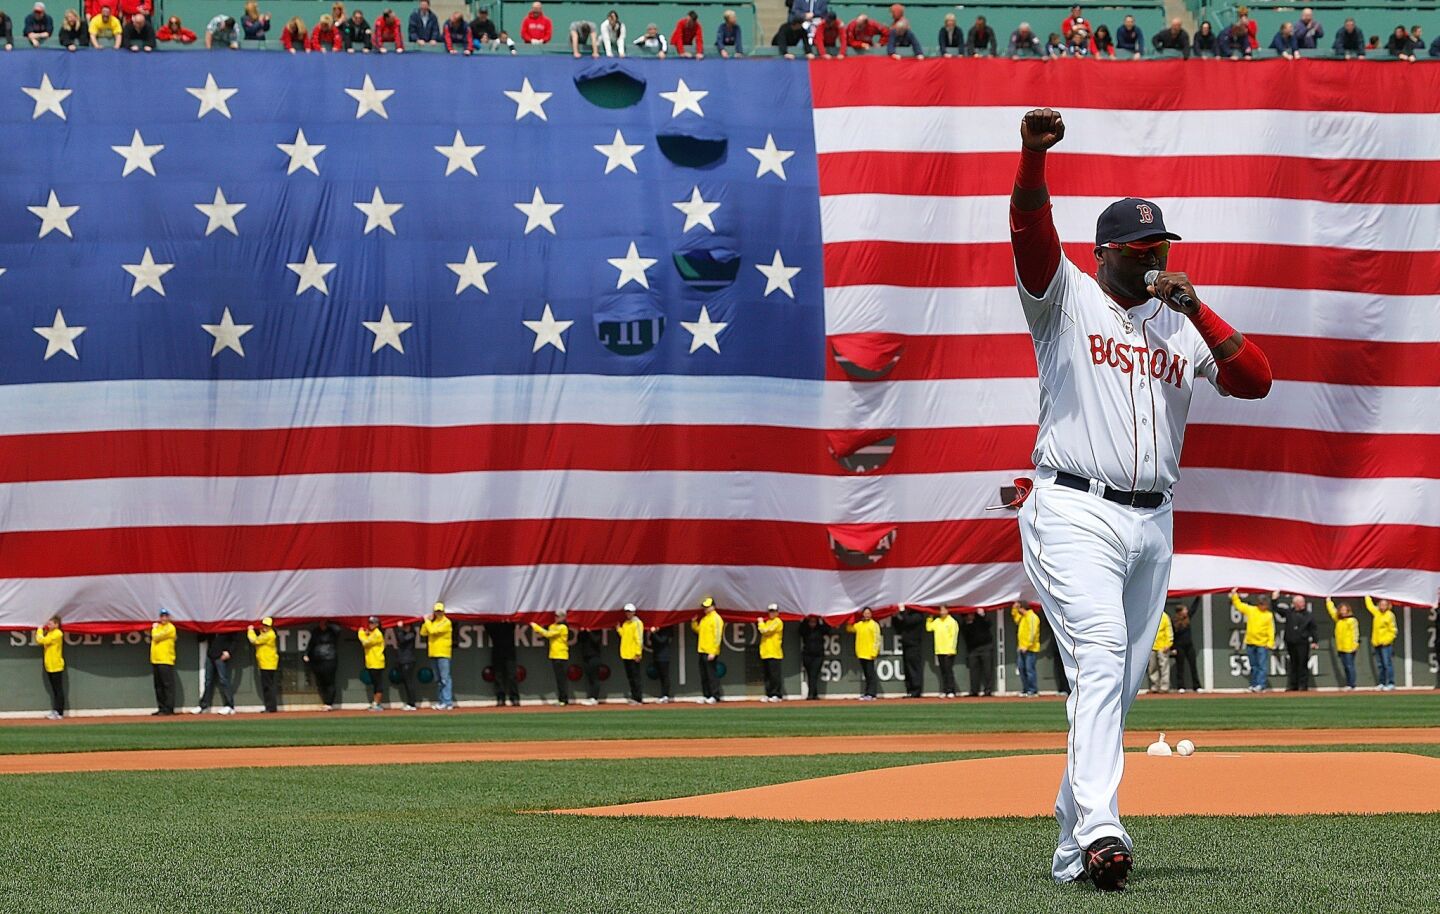 Before the game at Fenway Park, David Ortiz of the Boston Red Sox speaks during a pregame ceremony in honor of the marathon bombing victims.